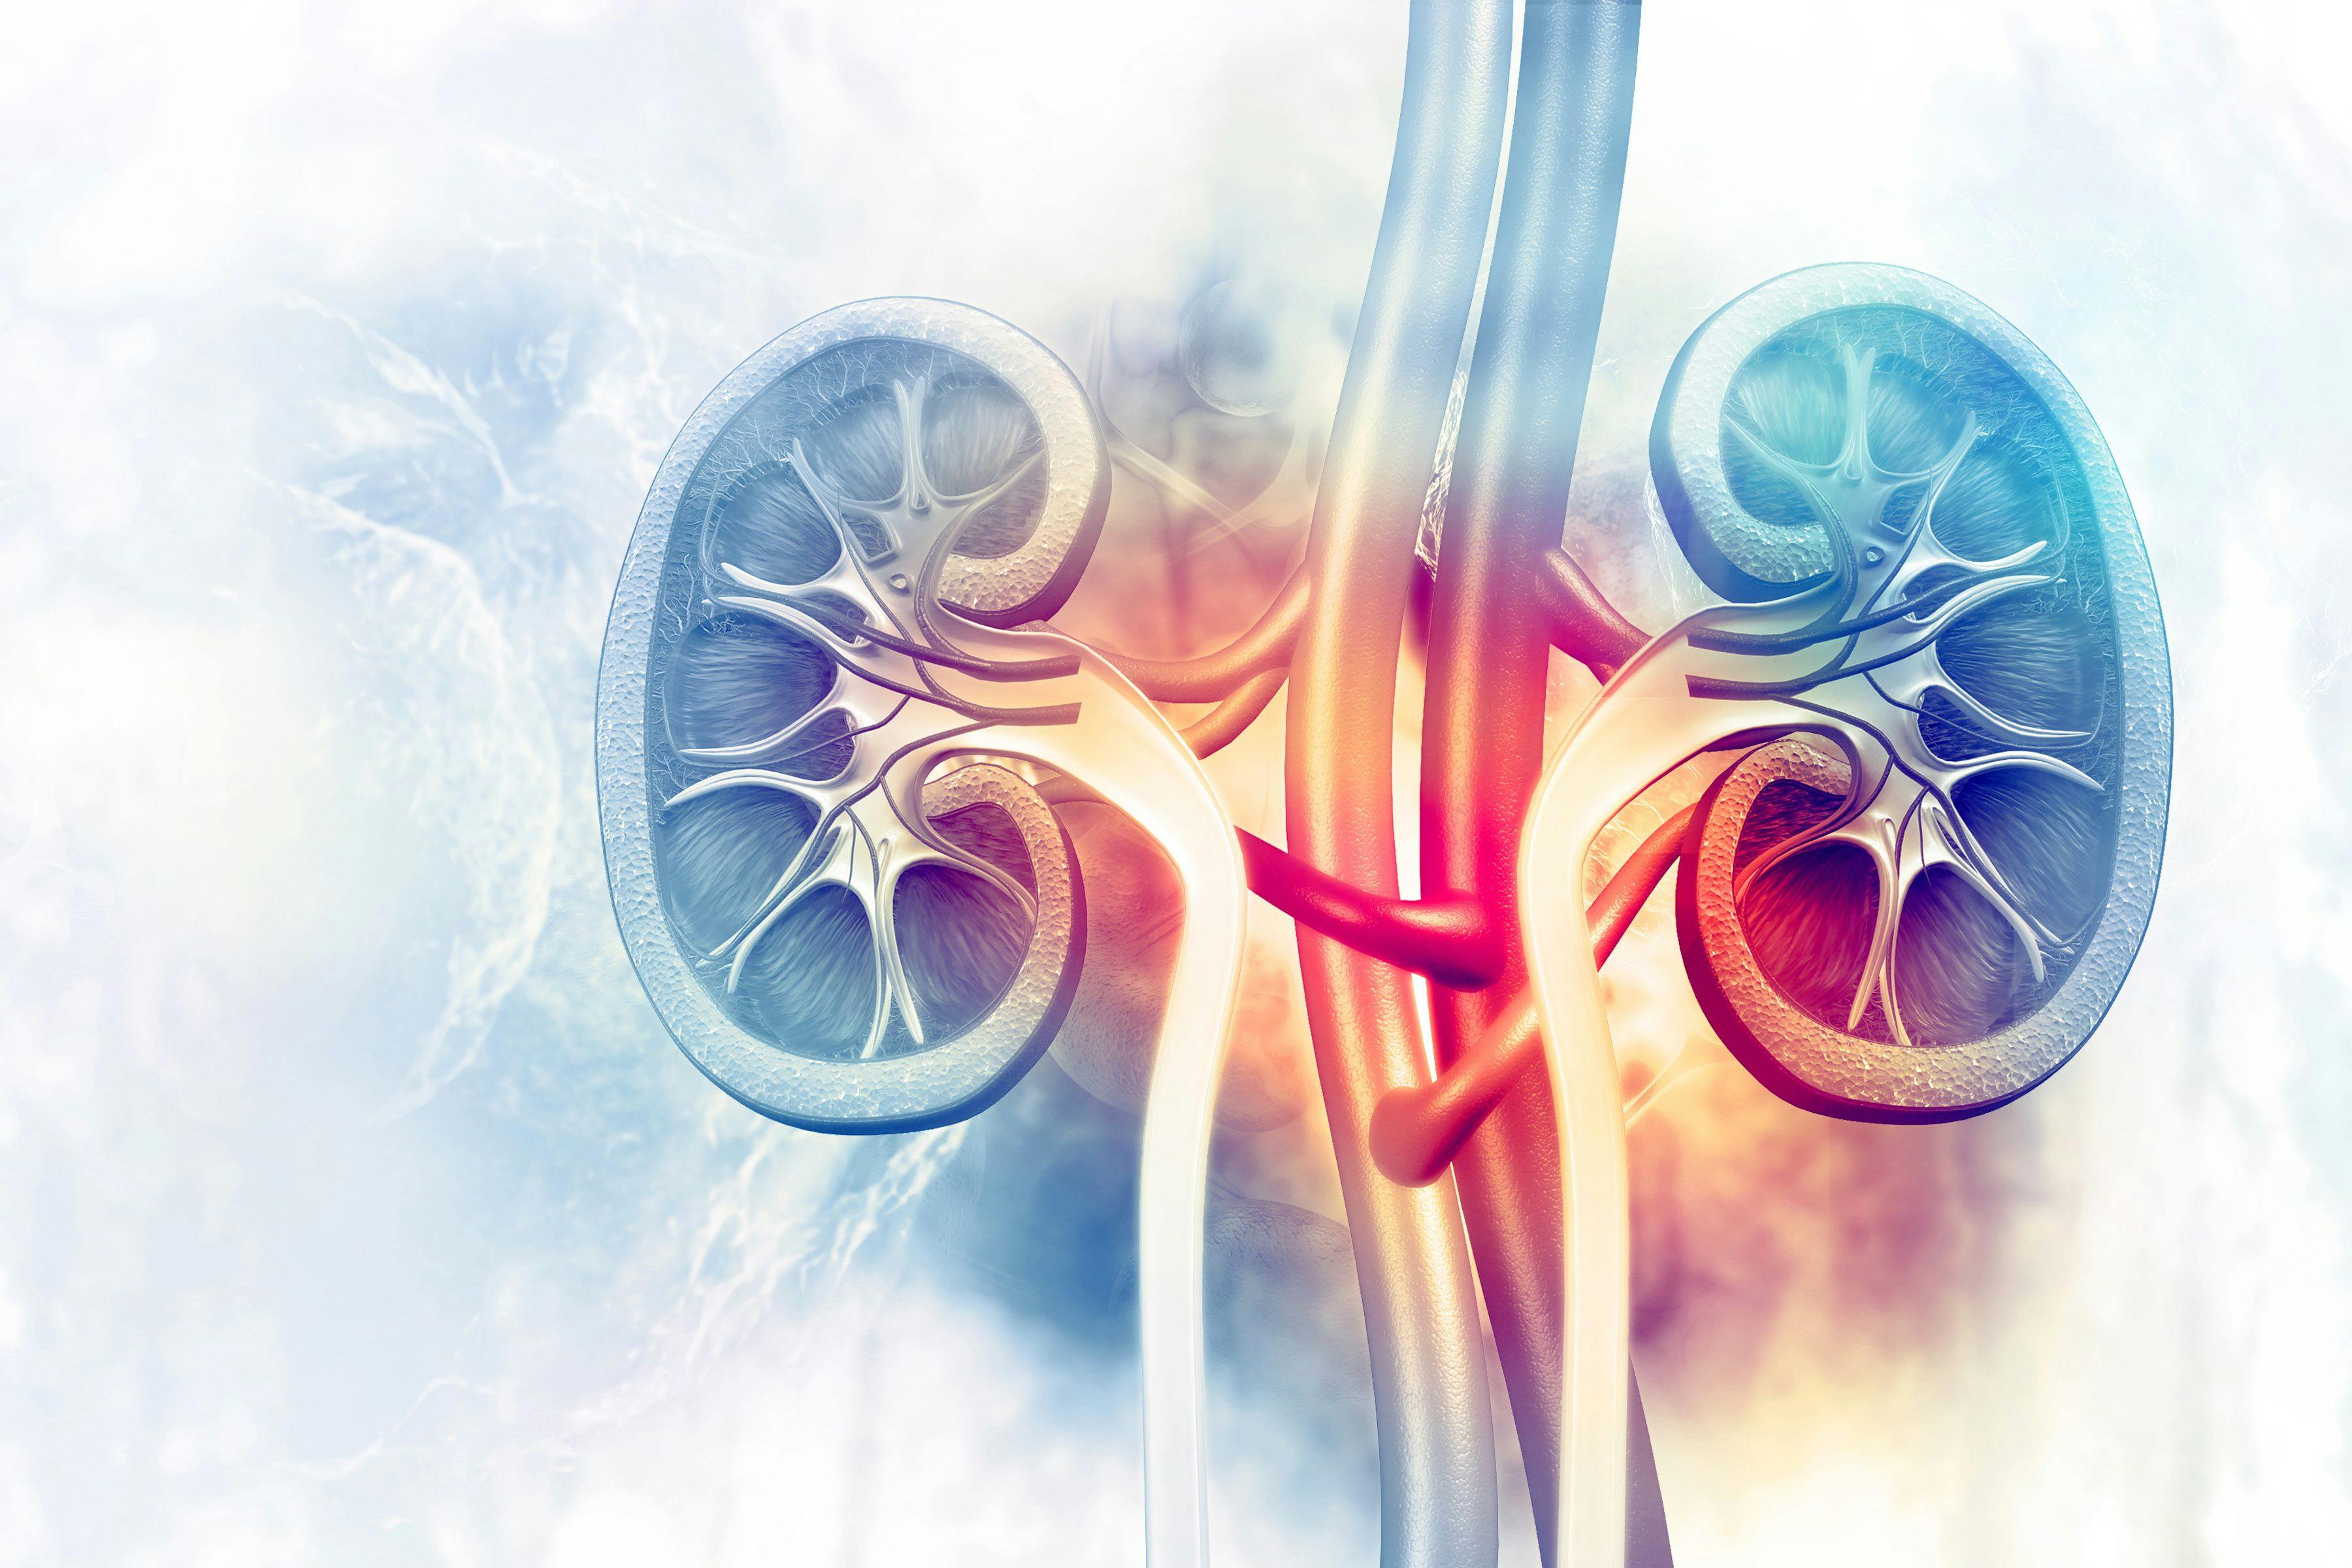 Human kidney cross section on scientific background | Image Credit: Crystal light - stock.adobe.com